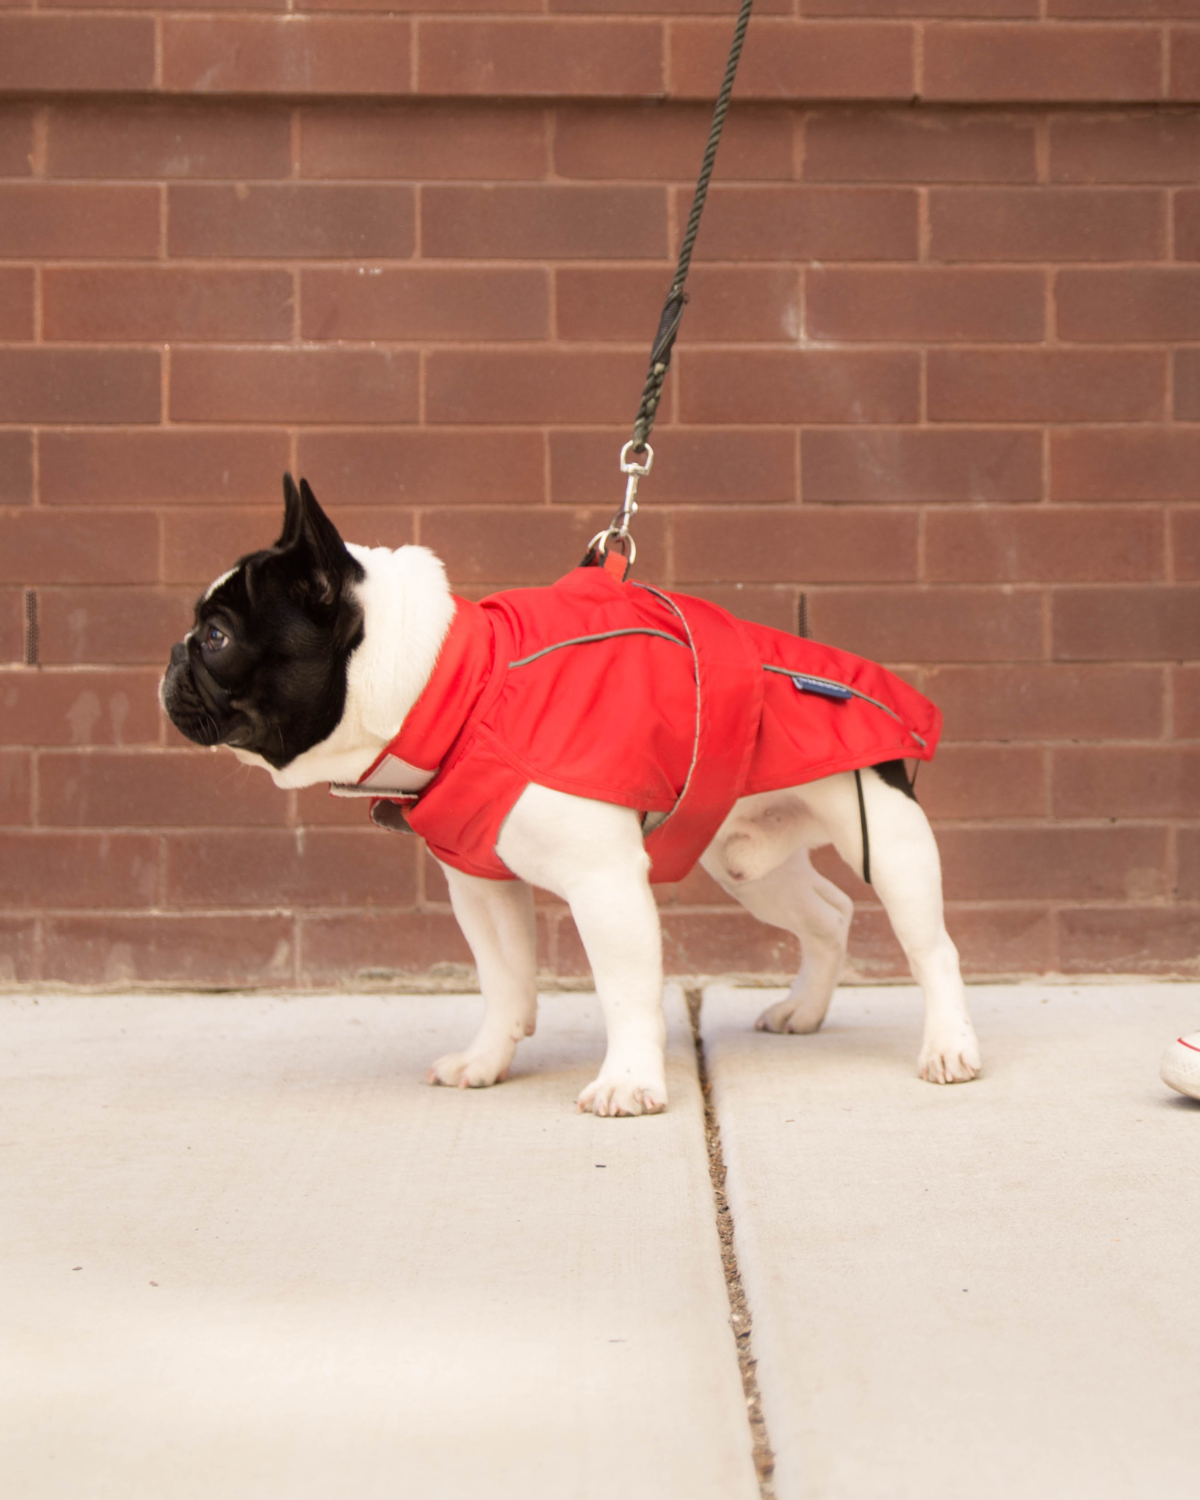 DJANGO's City Slicker Dog Jacket and Raincoat is a lightweight and water-resistant dog coat designed for spring showers, chilly autumn days, and snowy winter outings - djangobrand.com